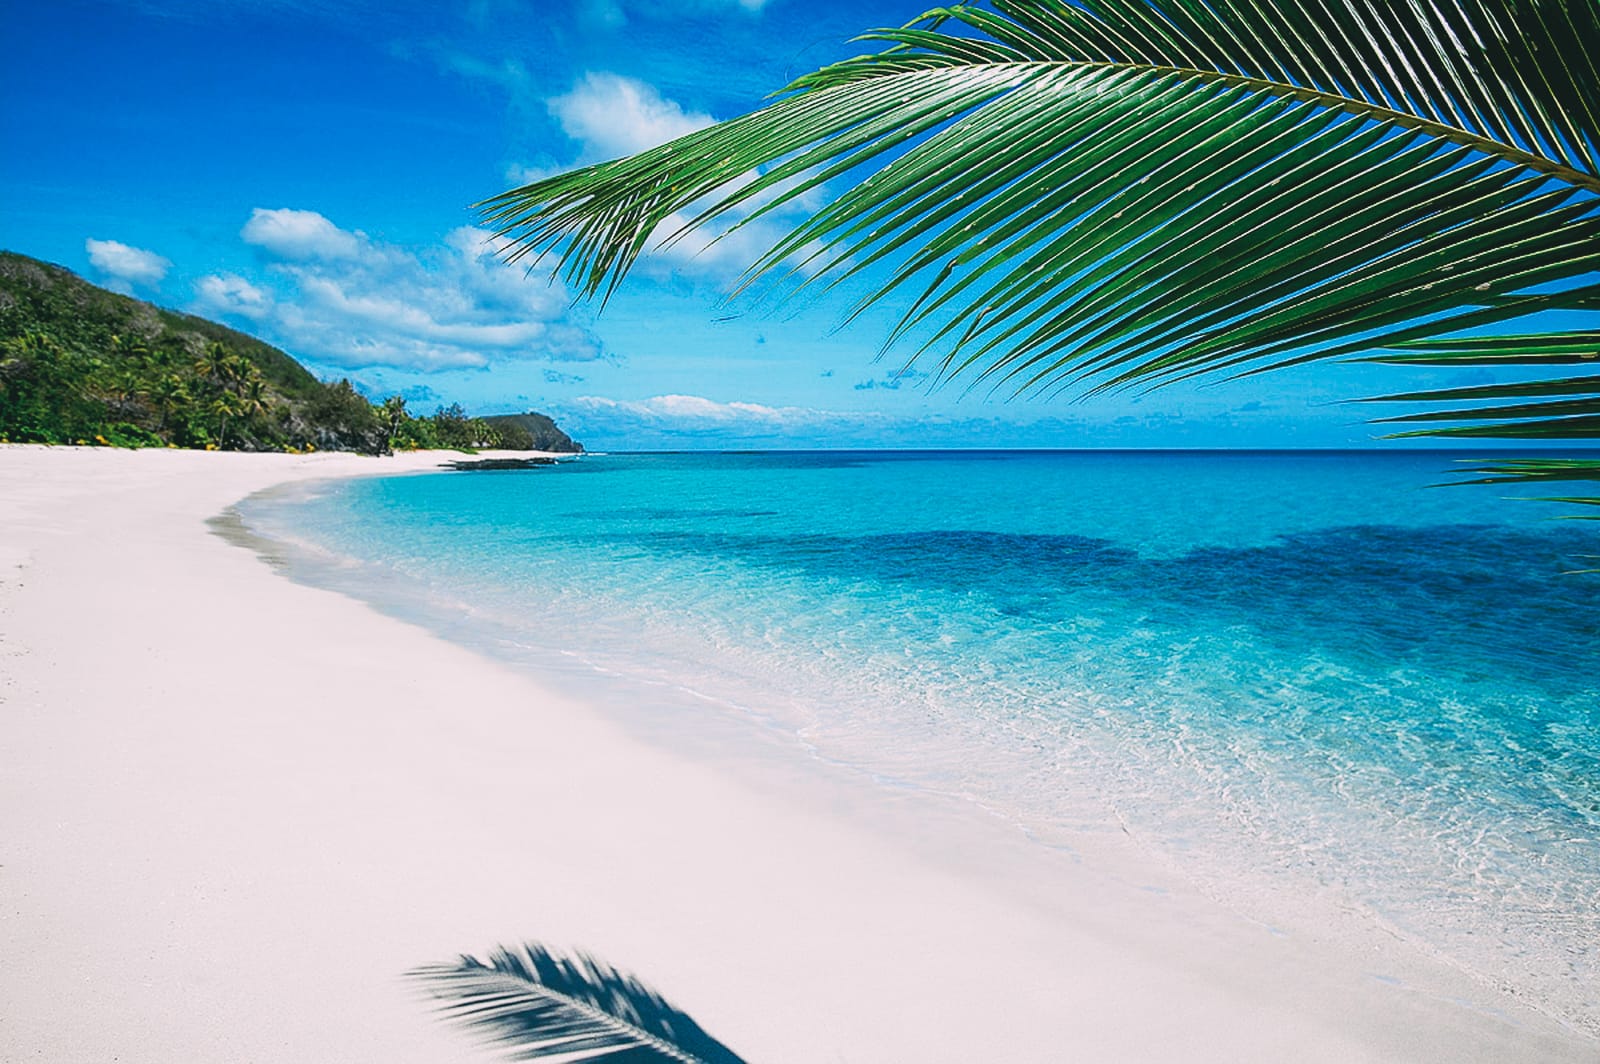 33+ What Are The Top 10 Most Beautiful Beaches In The World? Gif - Blaus